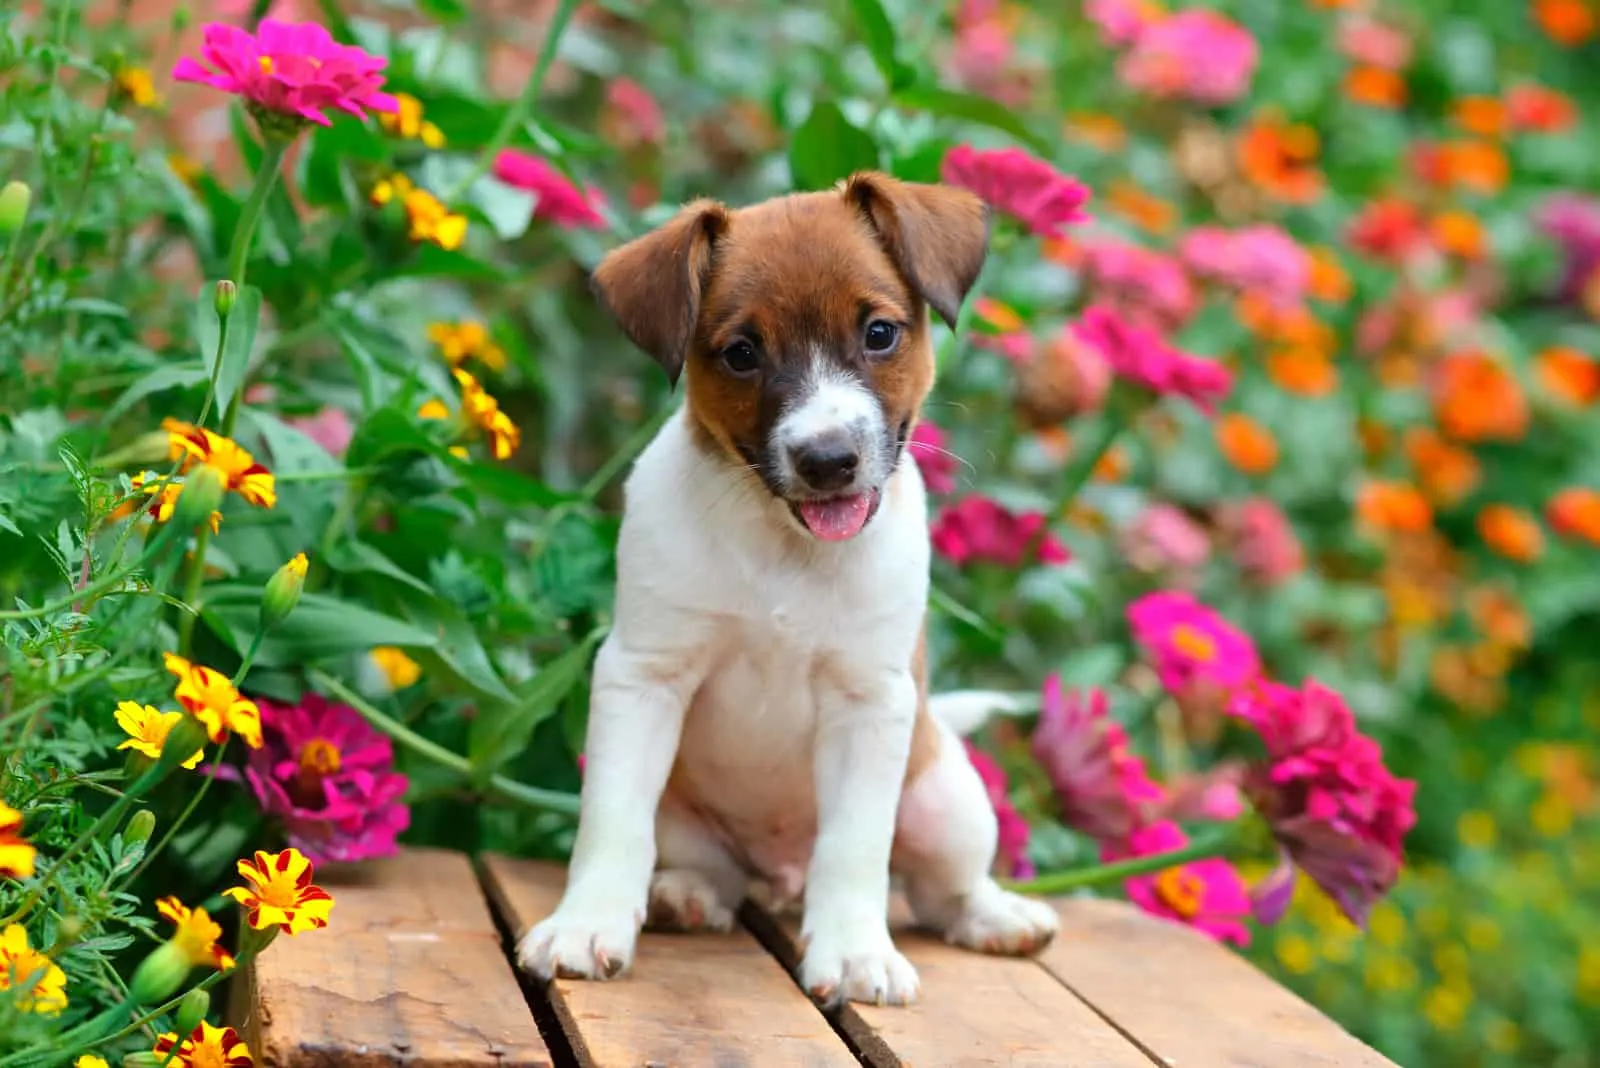 puppy sitting on old wooden crate in a garden full of colorful flowers